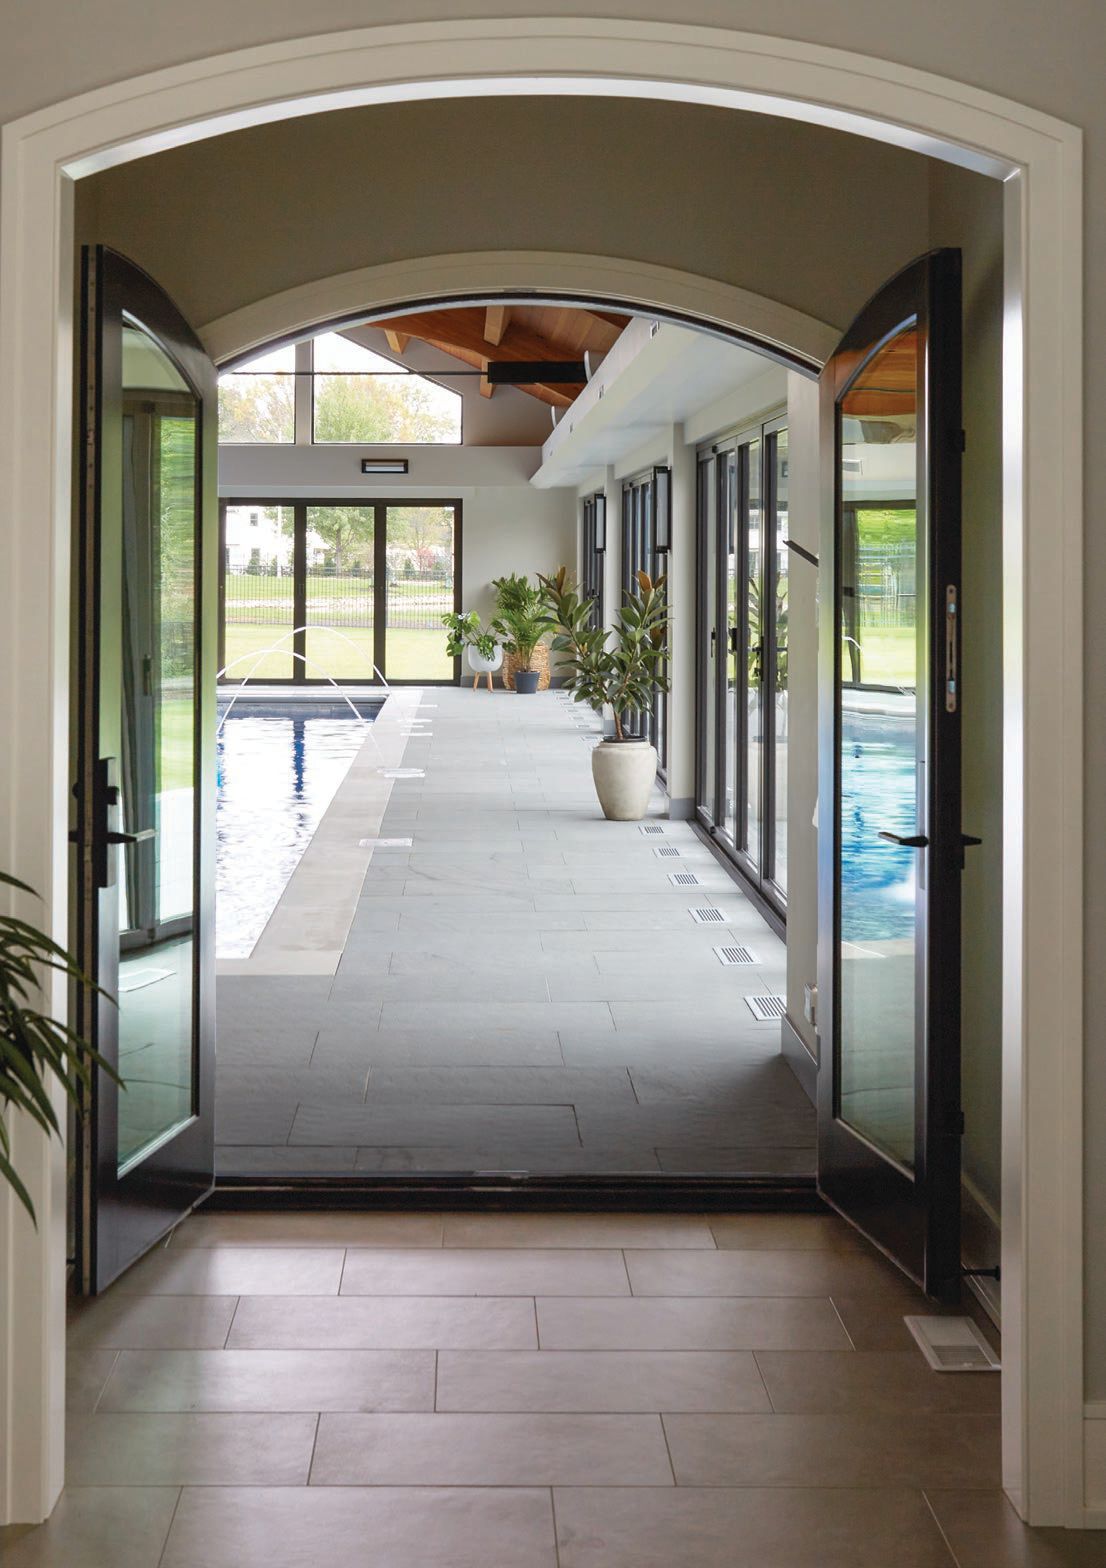 Striking archways add a touch of drama to the entrance of the pool house. Photographed by MICHAEL ALAN KASKEL